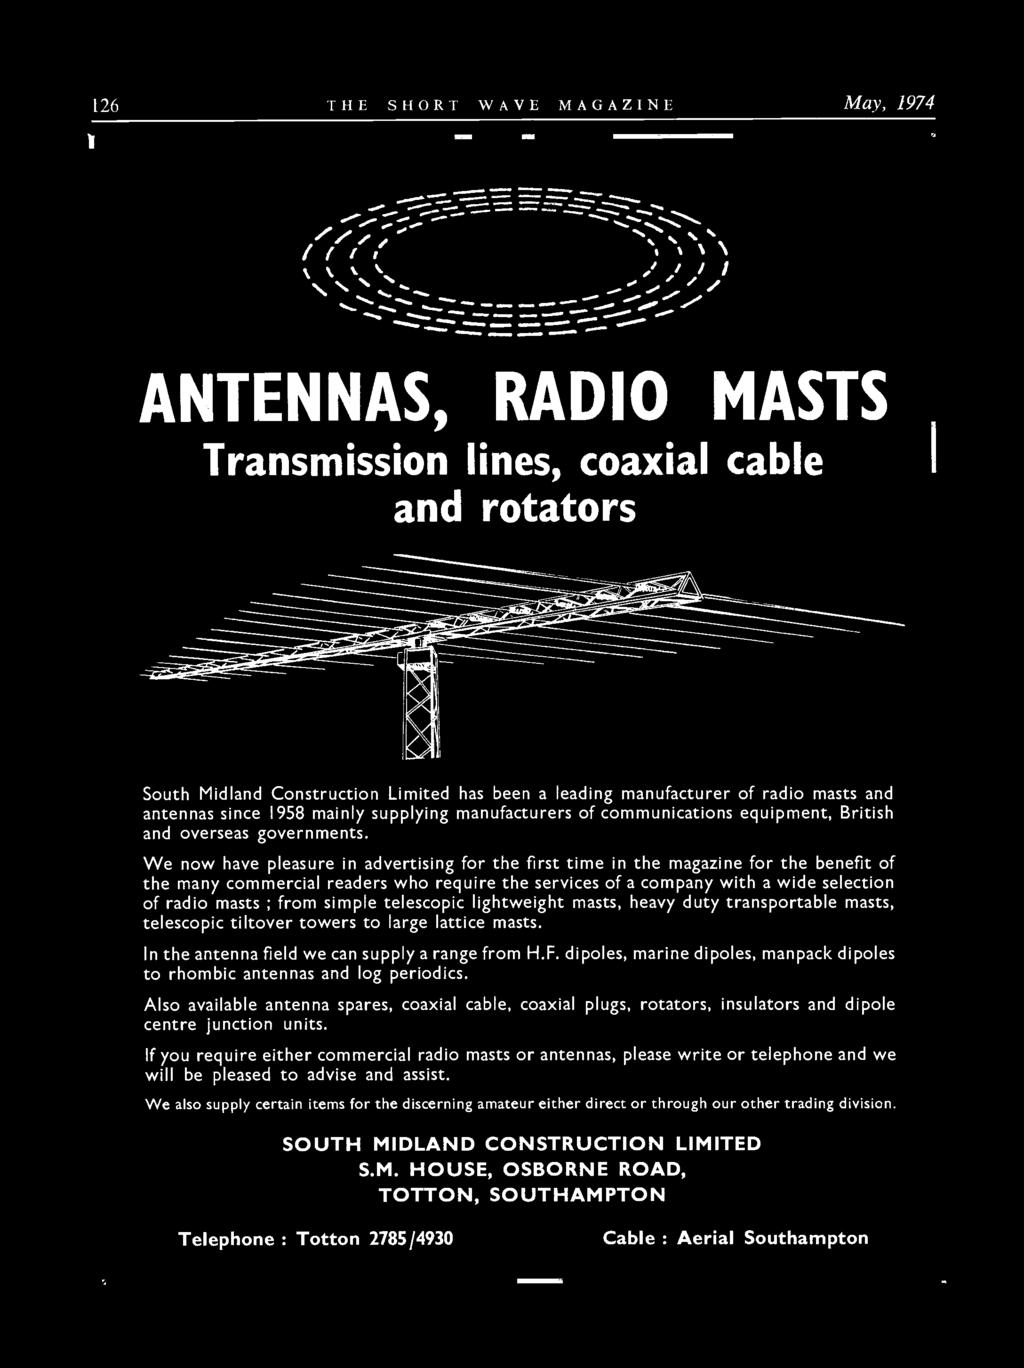 ..a ANTENNAS, RADIO MASTS Transmission lines, coaxial cable and rotators South Midland Construction Limited has been a leading manufacturer of radio masts and antennas since 1958 mainly supplying